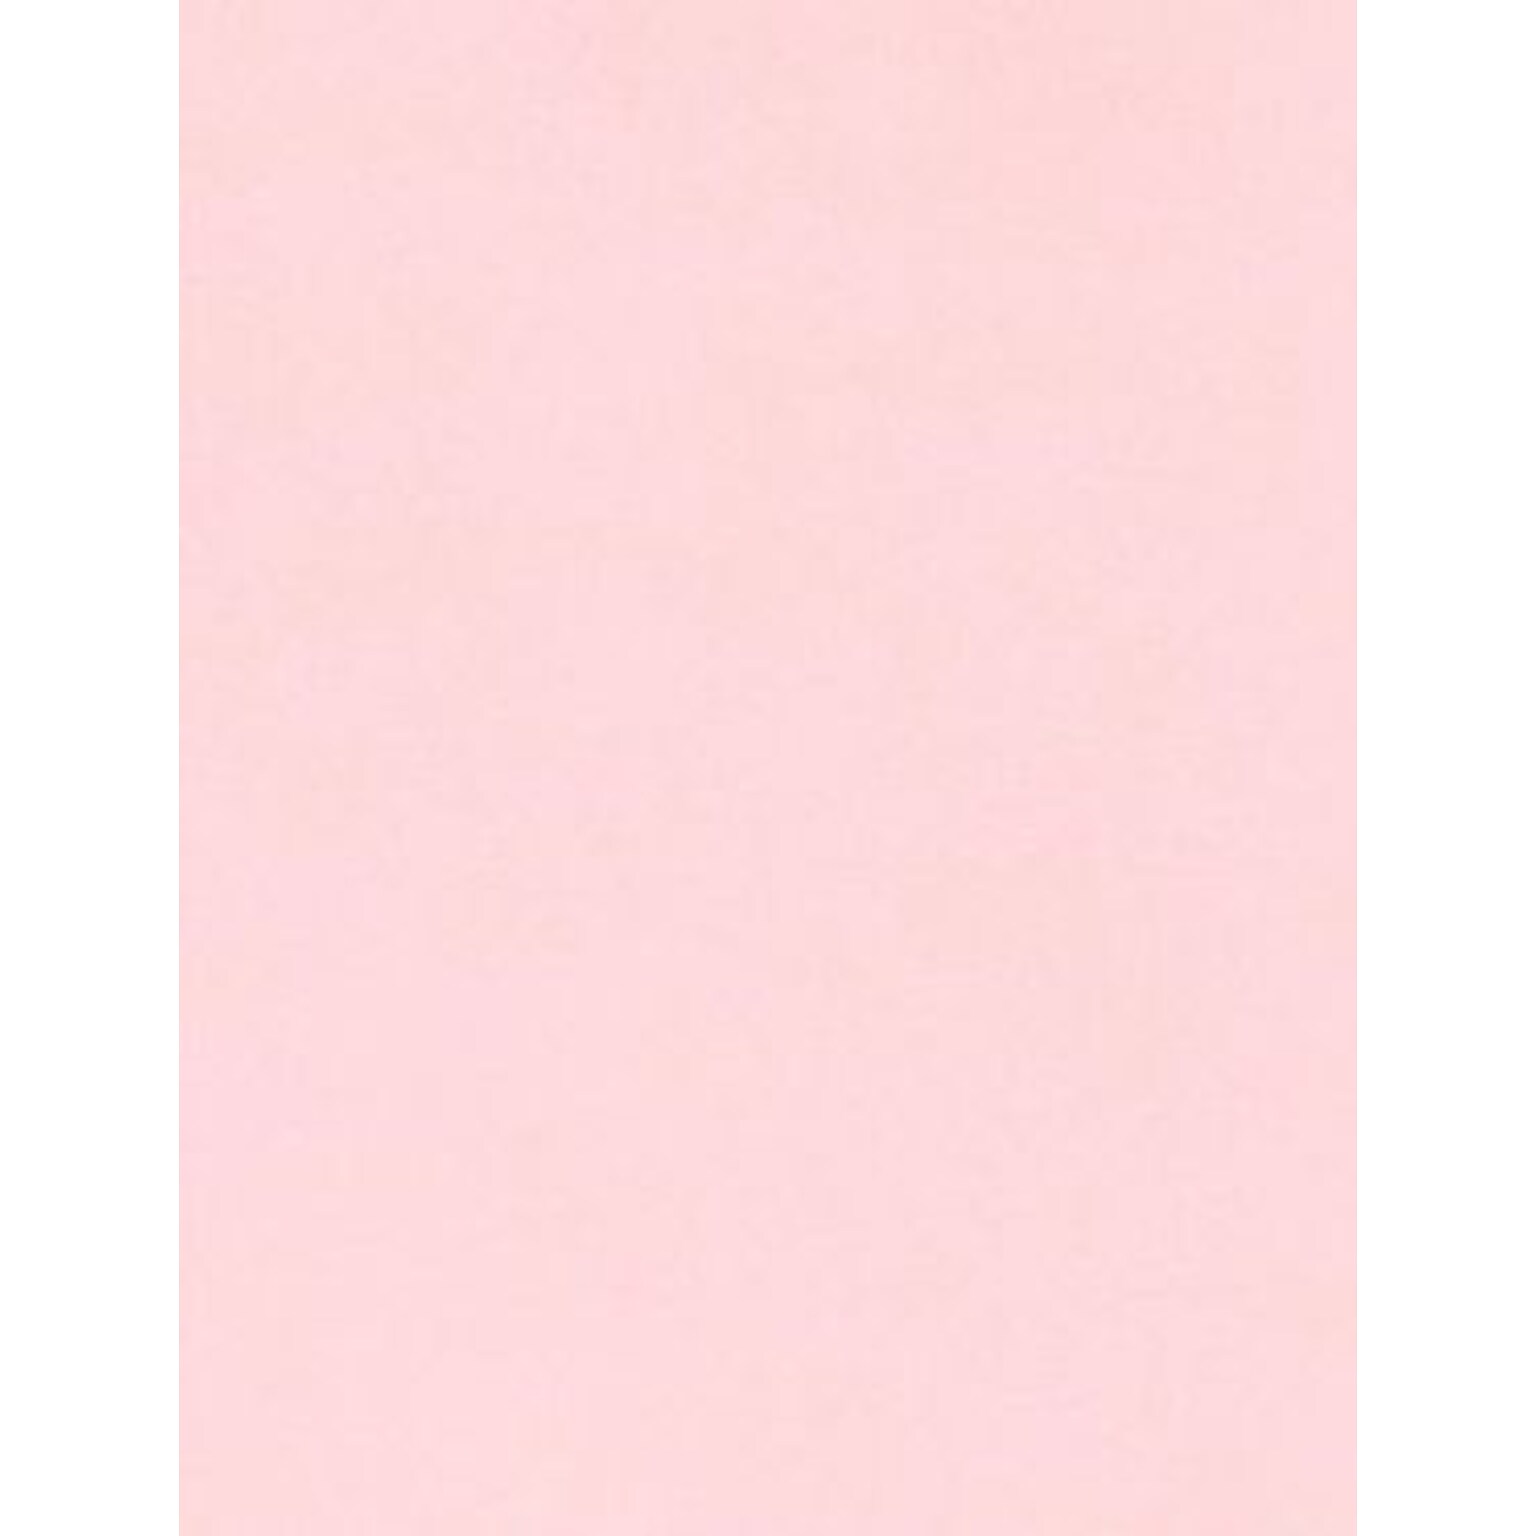 LUX Colors 11 x 17 Specialty Paper, 32 lbs., Candy Pink, 500 Sheets/Pack (1117-P-14-500)